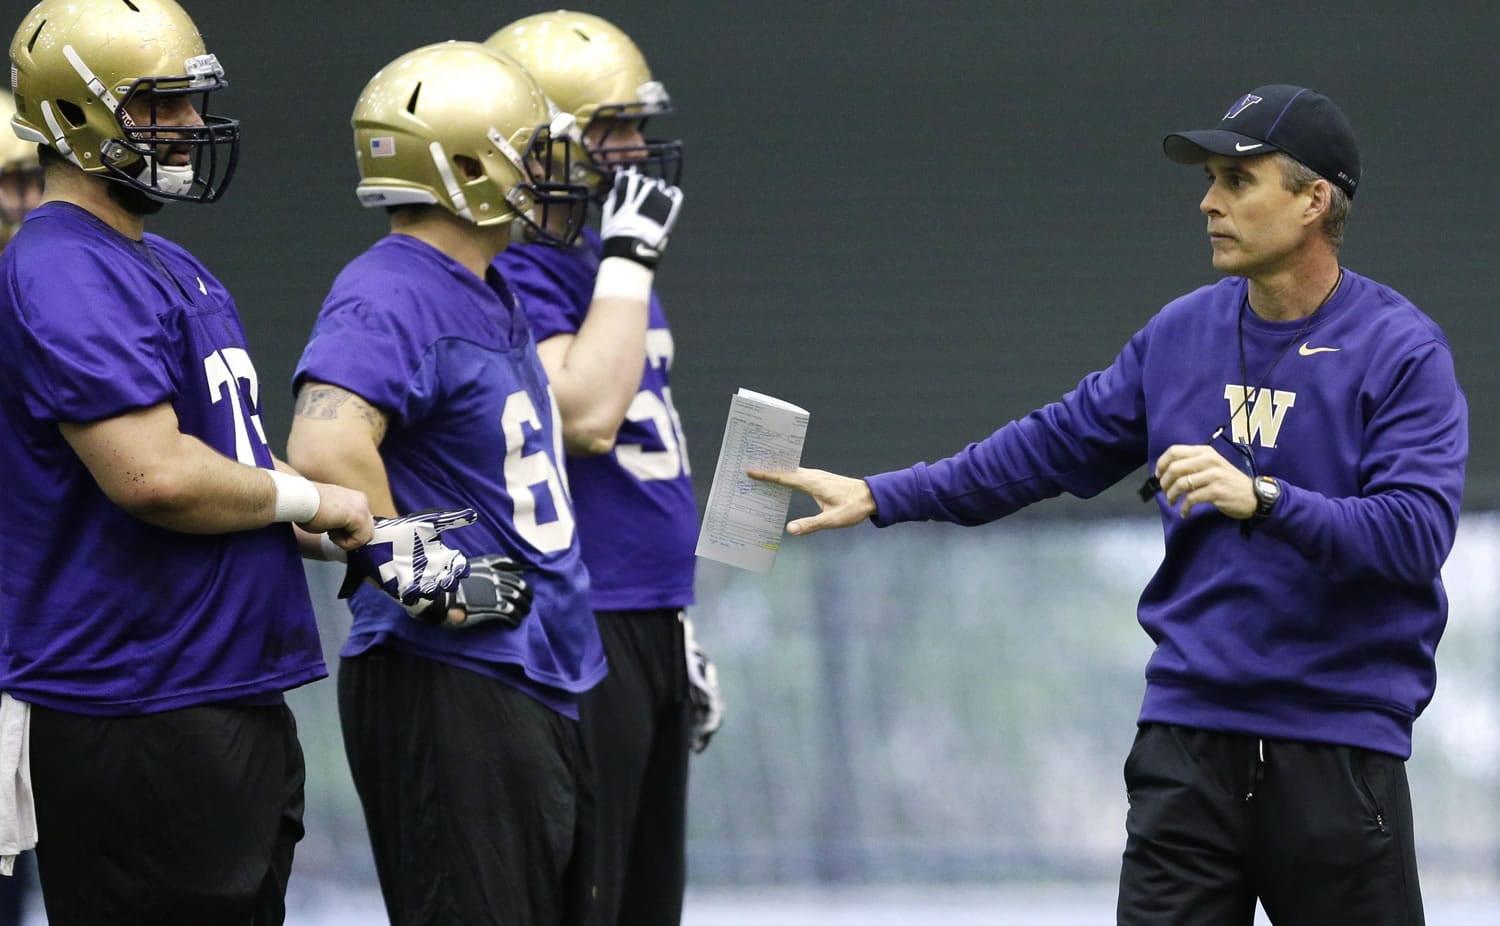 New Washington head football coach Chris Petersen, right, talks to players on the first day of Spring NCAA college football practice, Tuesday, March 4, 2014 in Seattle. (AP Photo/Ted S.